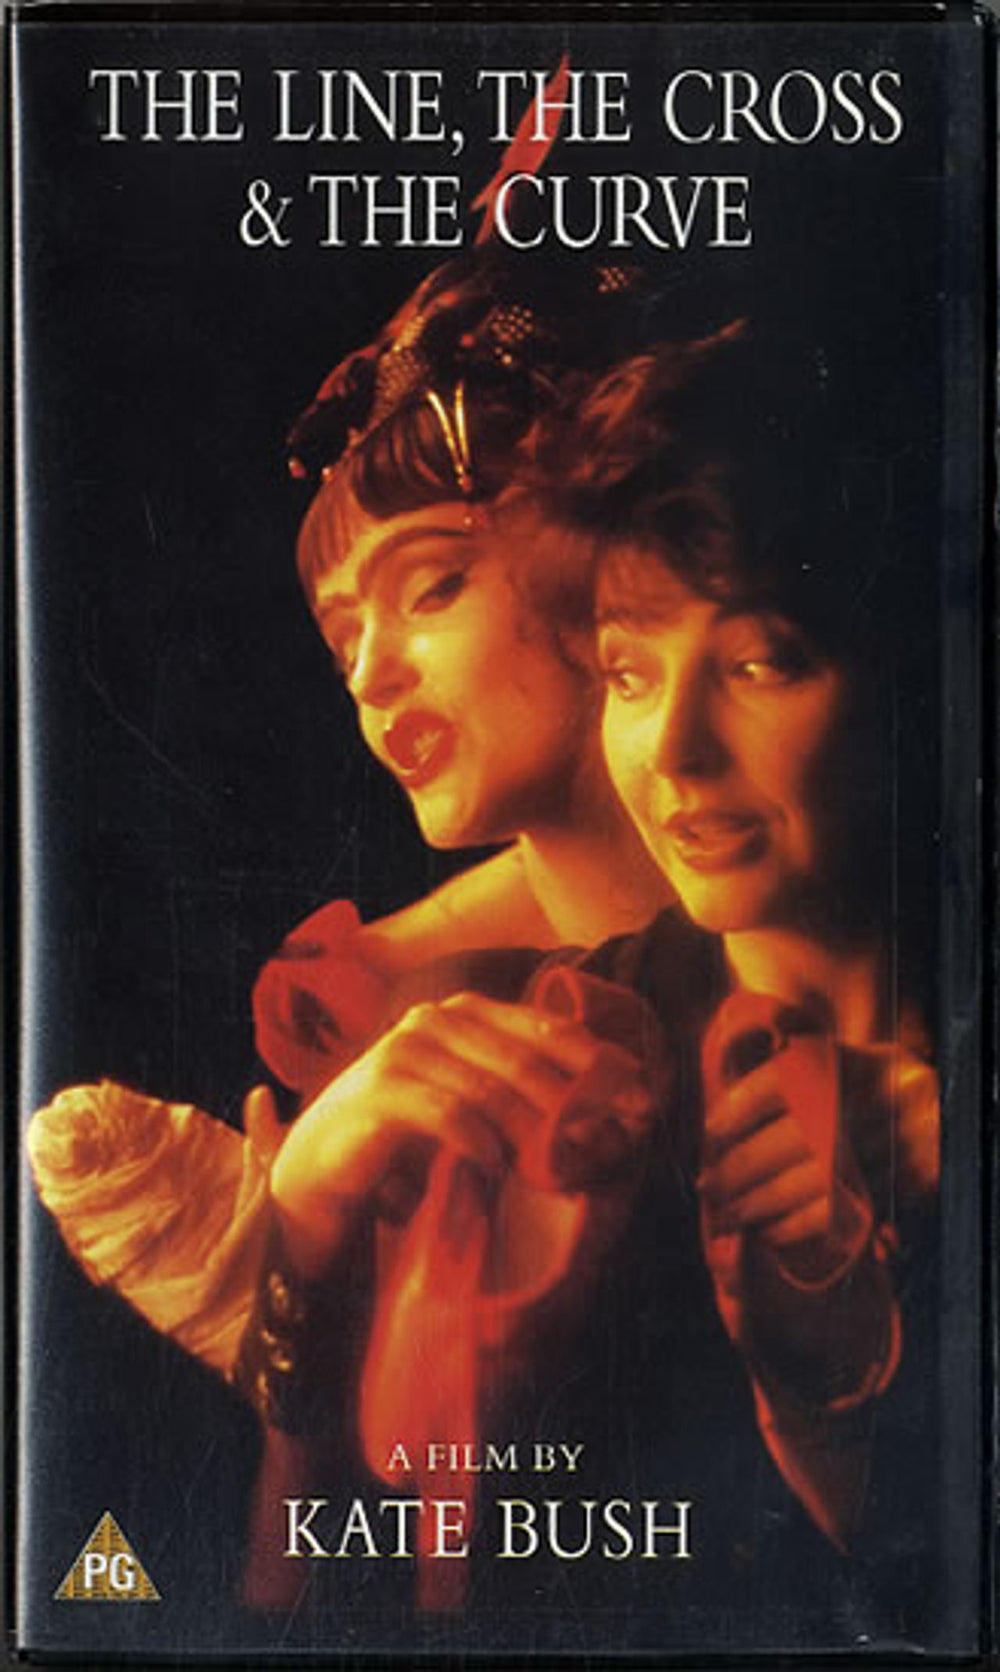 Kate Bush The Line, The Cross & The Curve UK video (VHS or PAL or NTSC) MVN4911853